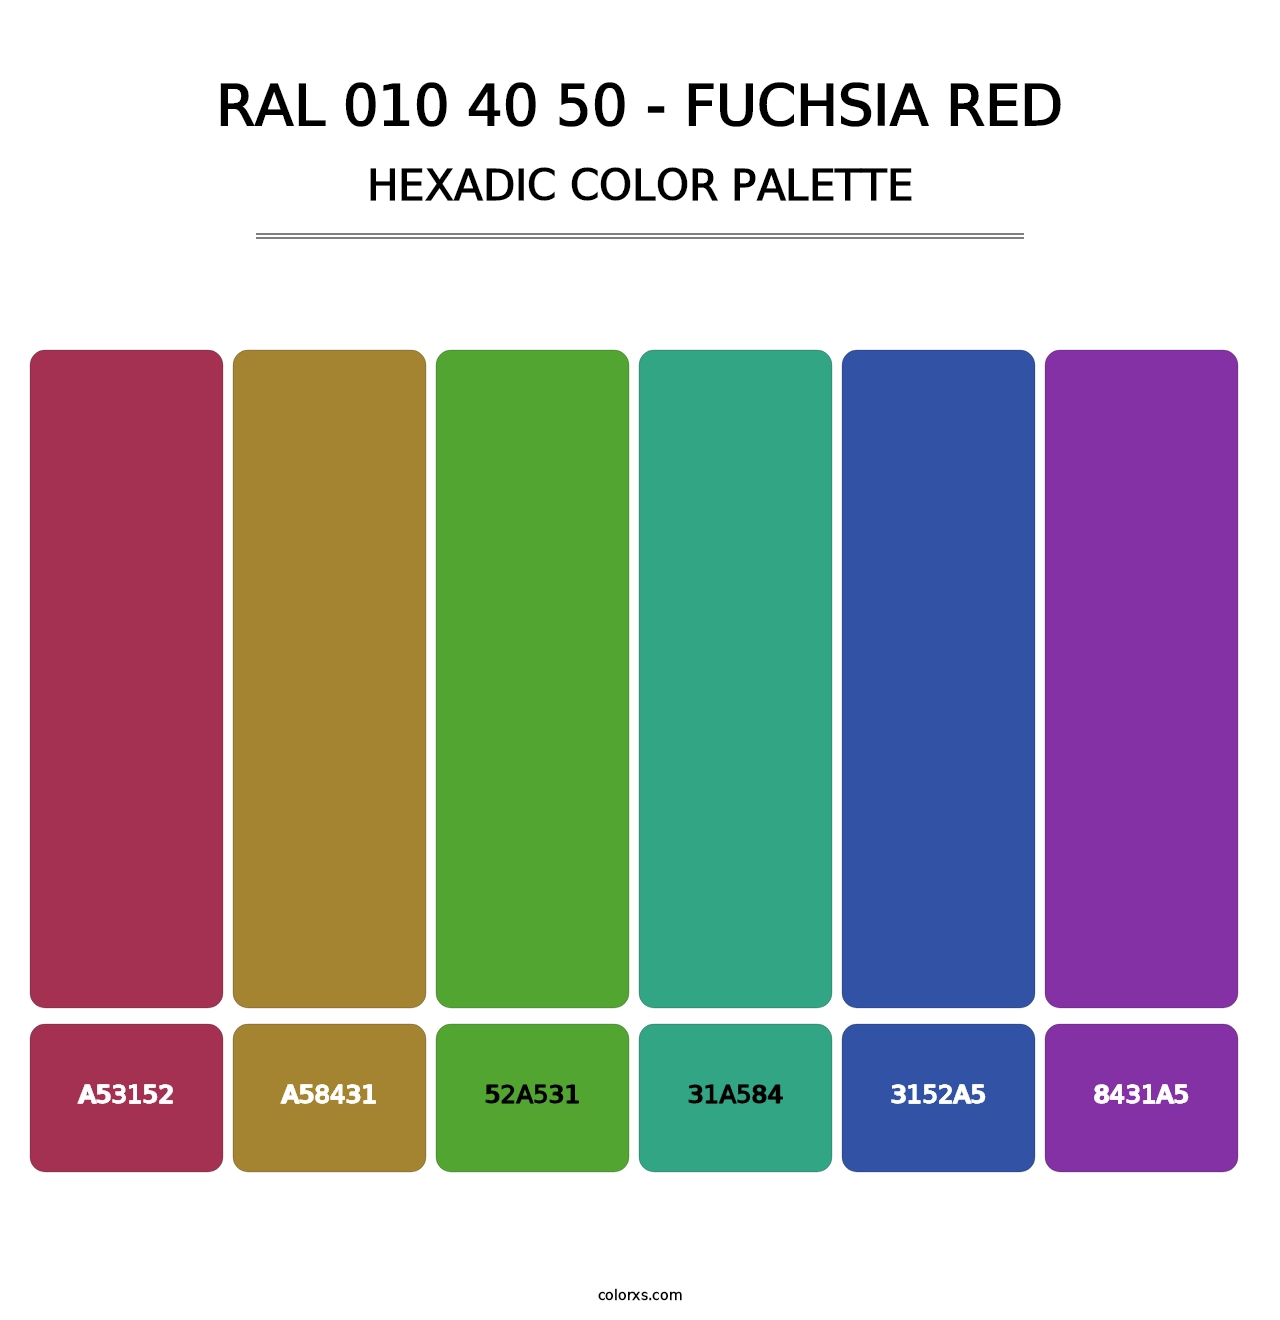 RAL 010 40 50 - Fuchsia Red - Hexadic Color Palette